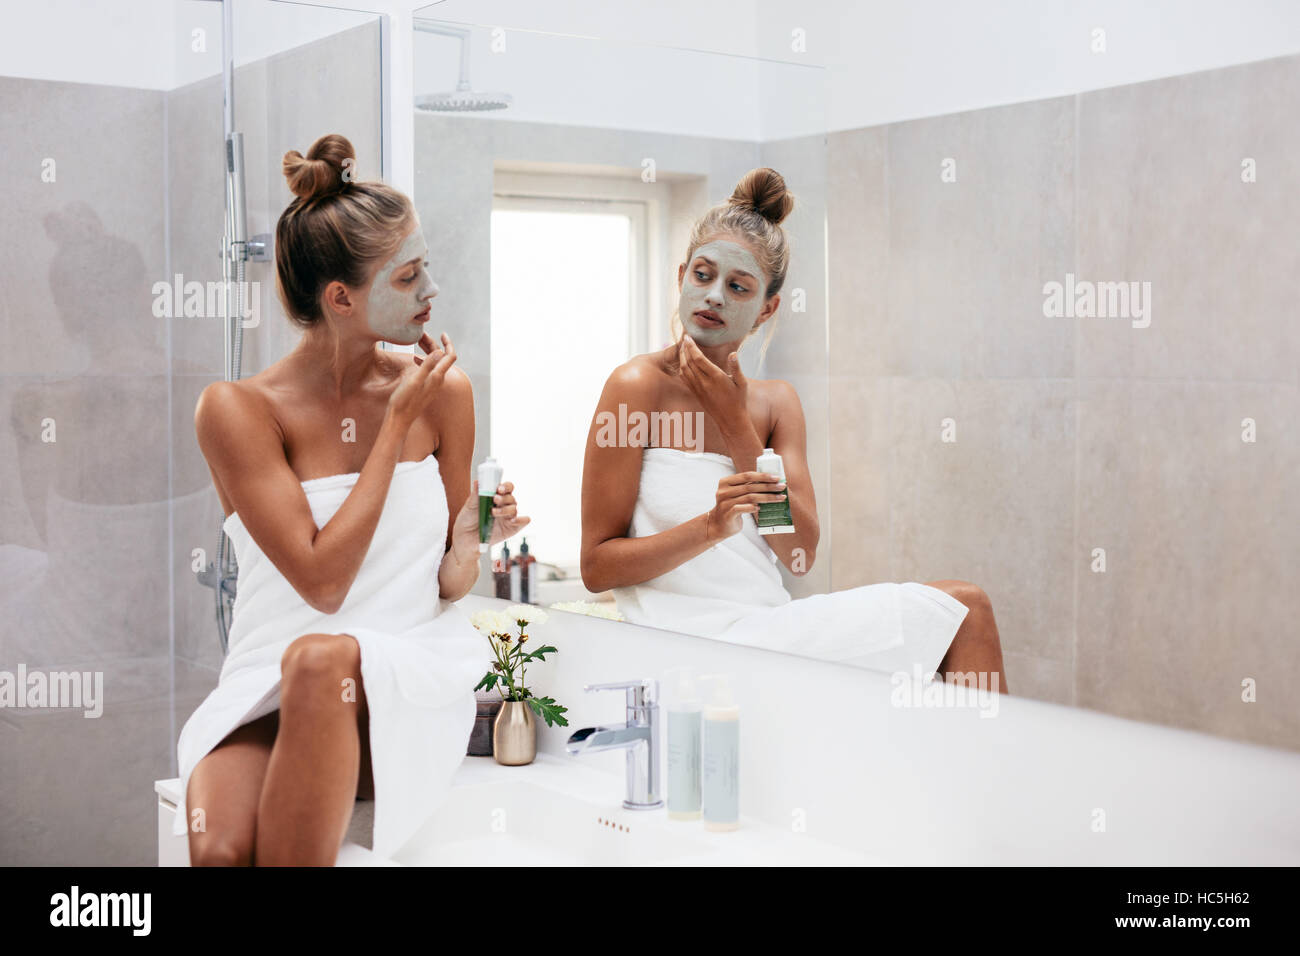 Young woman applying facial mud clay mask to her face in bathroom. Beautiful female wrapped in towel looking into mirror and doing facial beauty treat Stock Photo